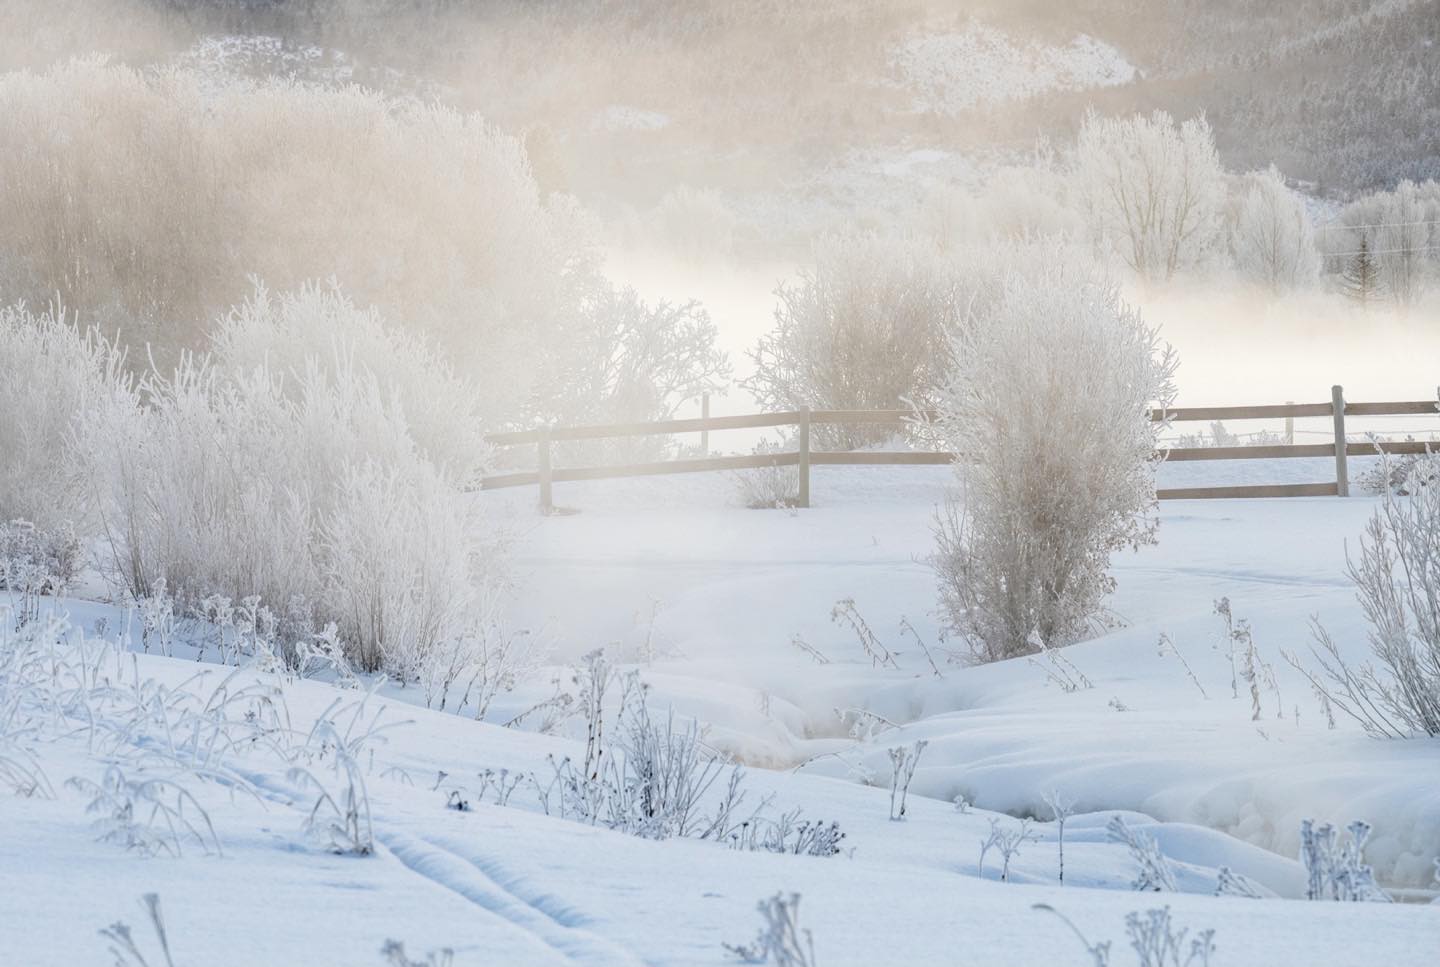 Our front yard in Teton Valley, Idaho on a frosty morning, as the sun begins to break through the winter smoke. Though snow levels are not as high as past years, we are experiencing good ski conditions on sunny days. #tetonvalleyidaho #bestofthegemstate #orcuttphotography #victoridaho #winterphotography #frostphotos